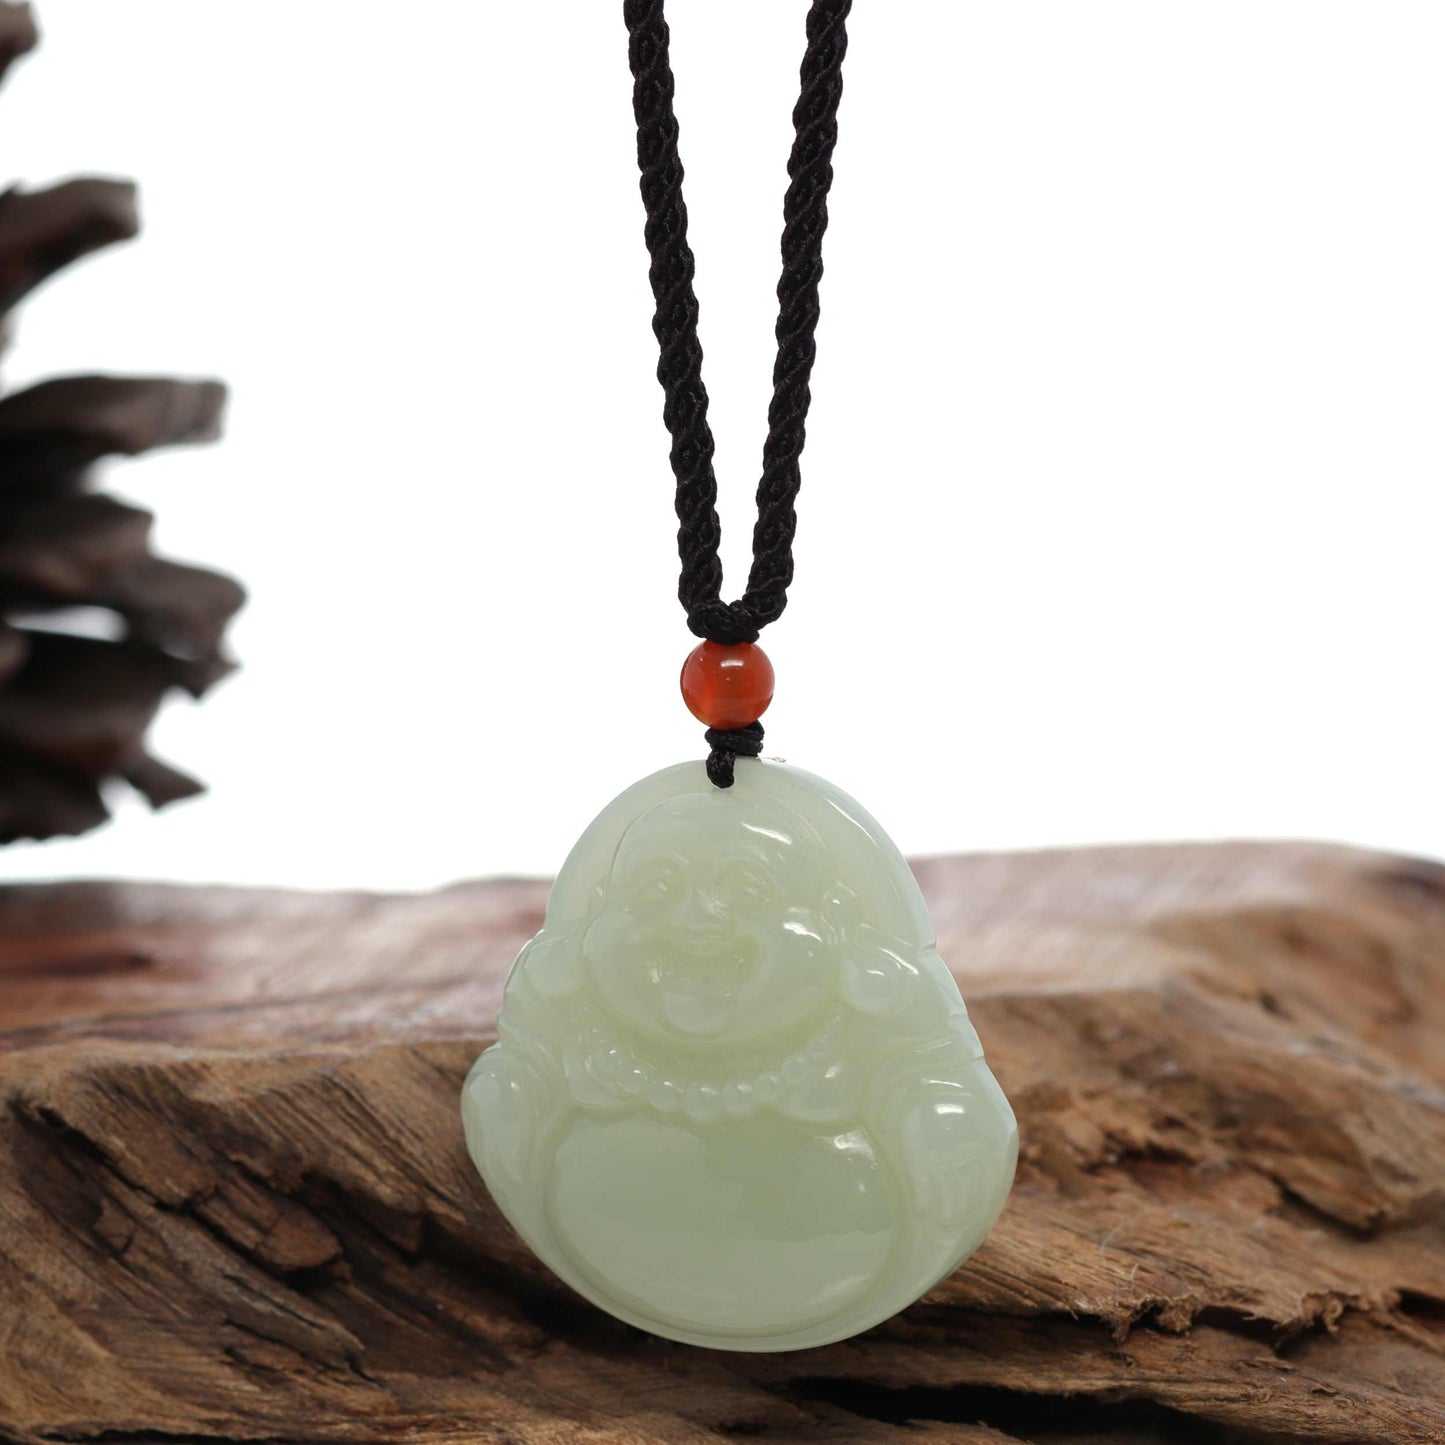 RealJade Co.® "Goddess of Compassion Buddha" Genuine HeTian White Nephrite Jade Guanyin Carving Pendant Necklace-RealJade Co.® Happy Valley Oregon